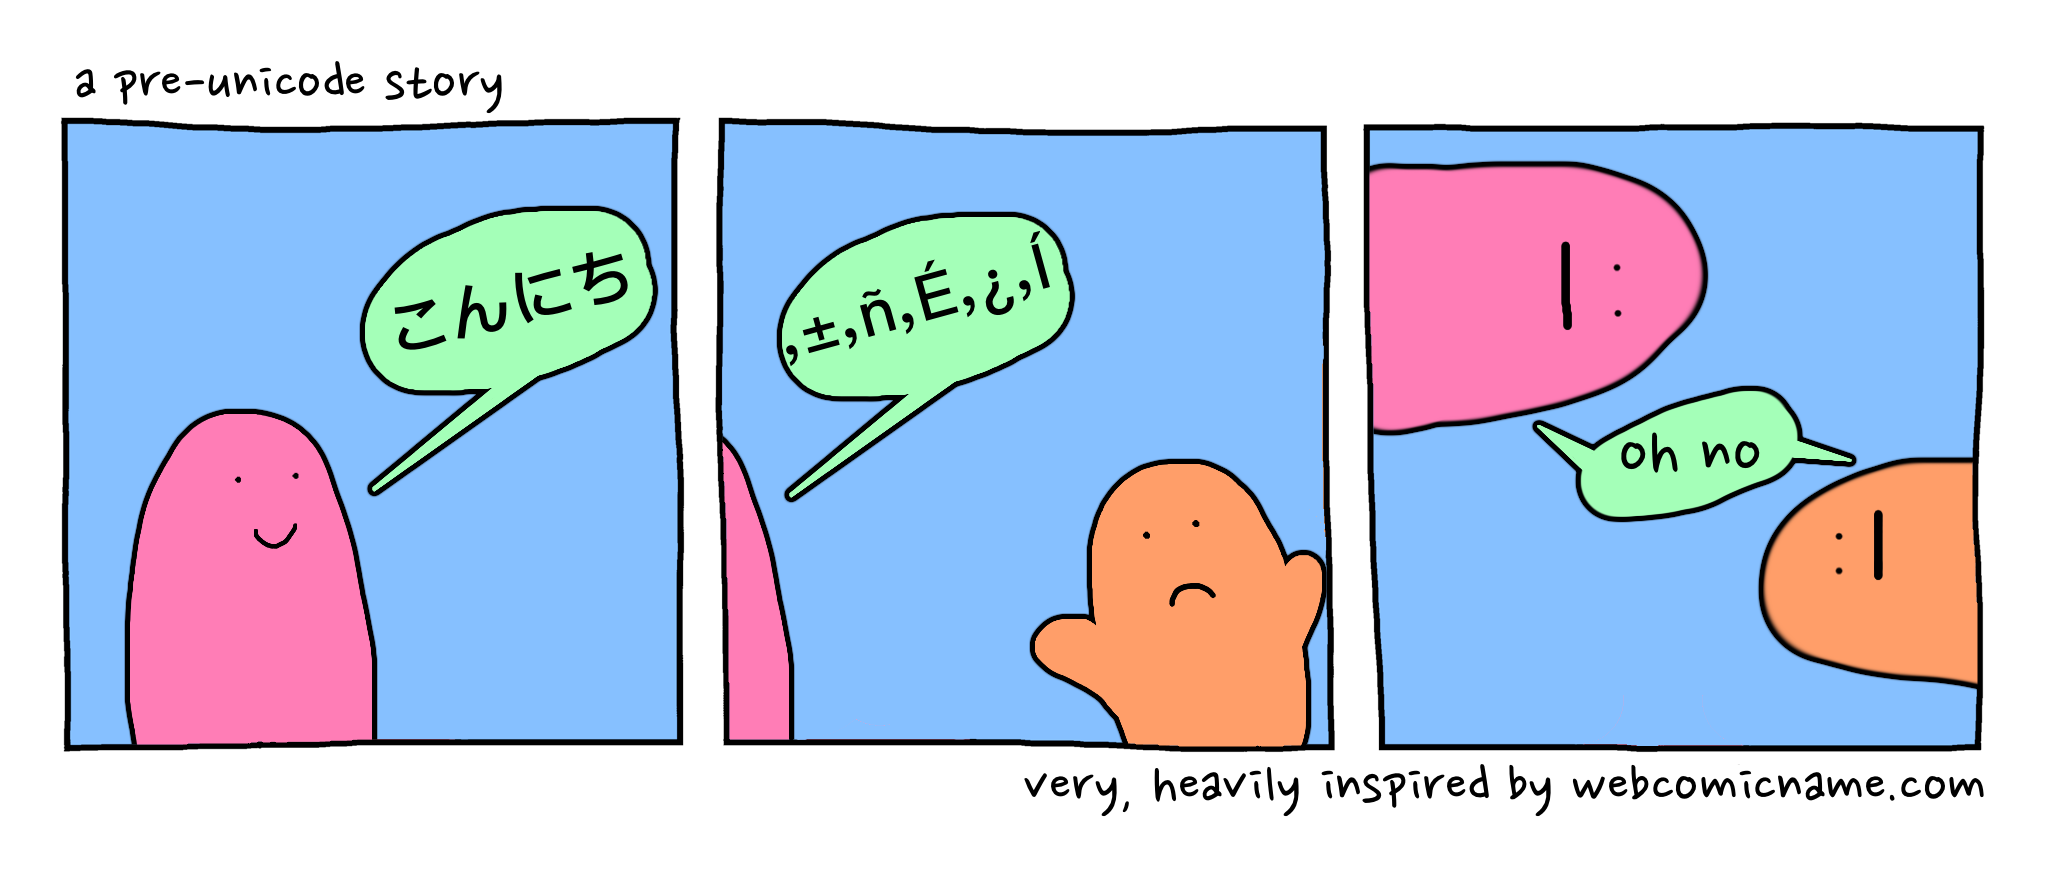 A parody of the "oh no" comics, titled "a pre-unicode story". A pink blob happily says "Hello" in Japanese. The orange blob receives it in mangled Latin characters and puts their arms up in confusion. In the final panel, the two blobs are sideways and sharing the same "oh no" speech bubble.